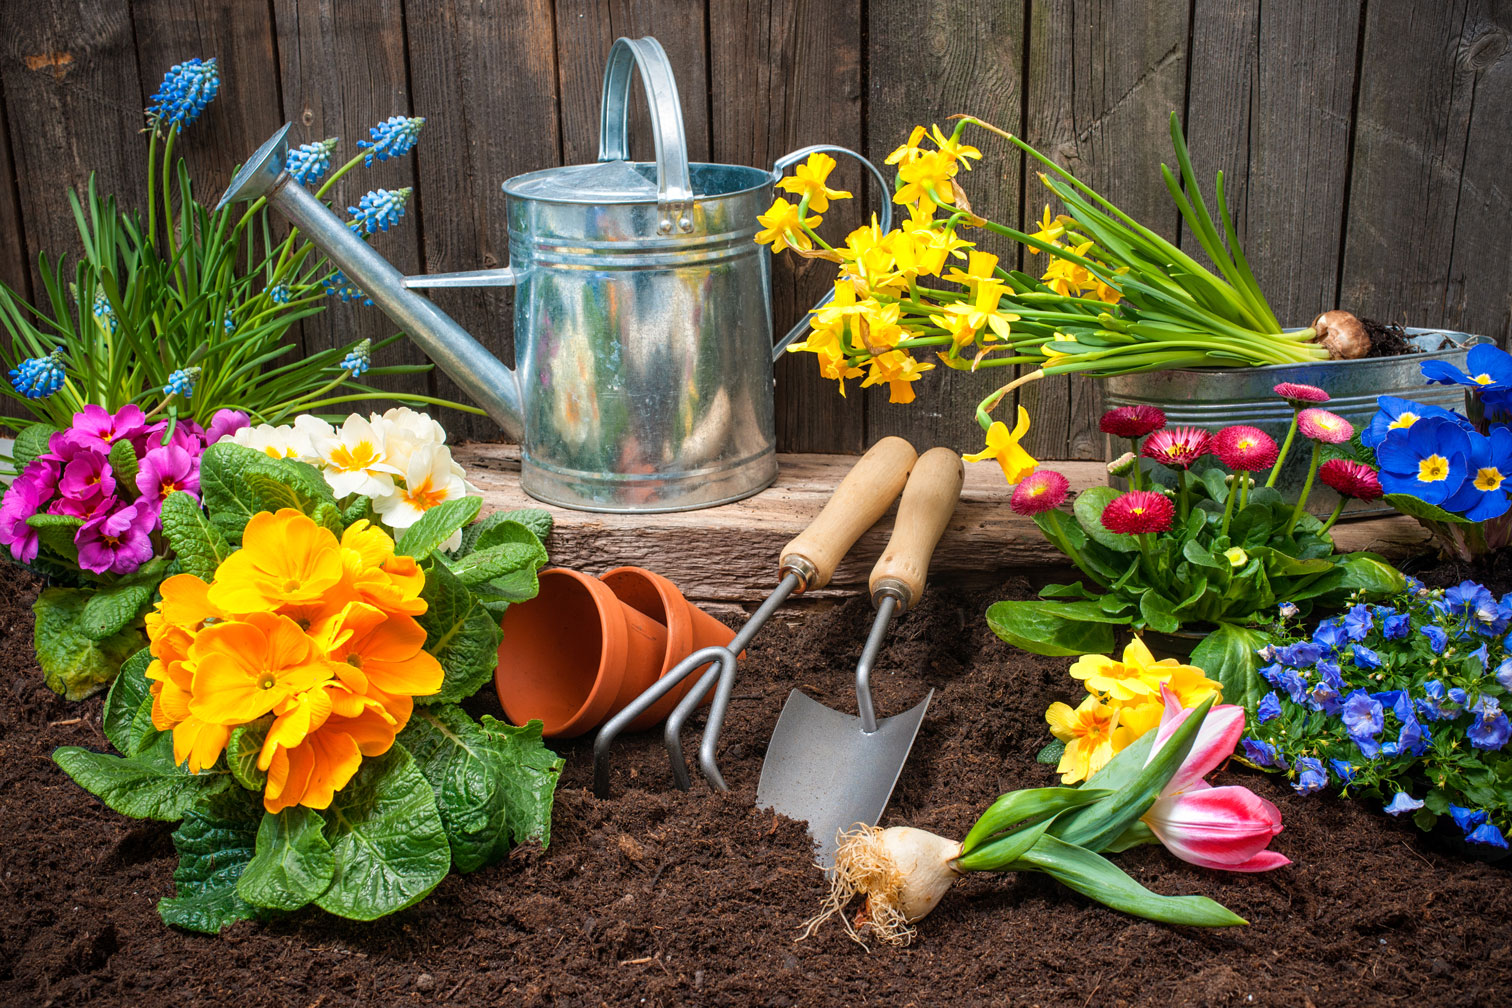 Landscaping with flowers, tools and soil